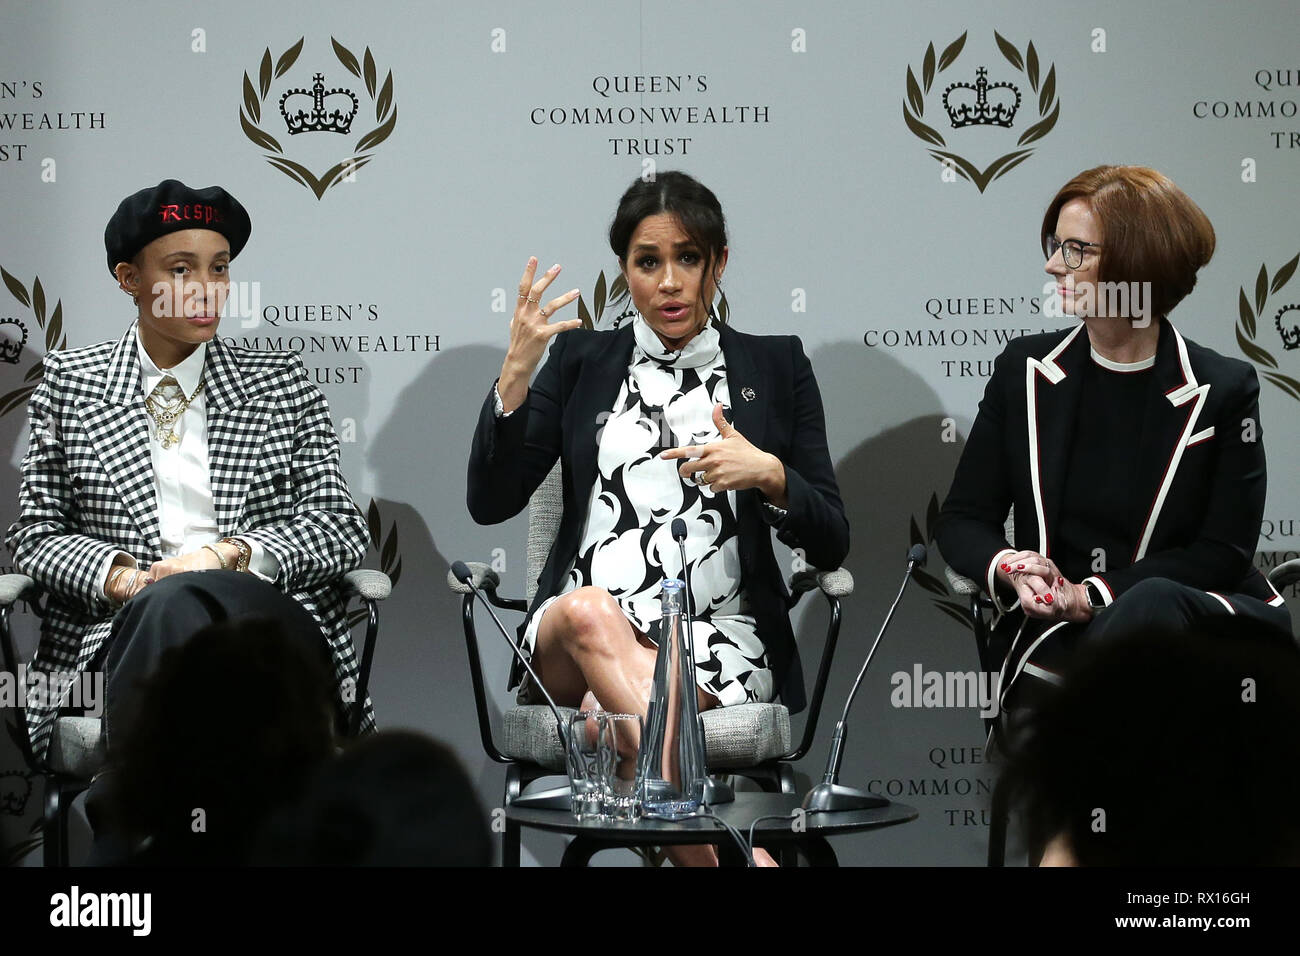 (left to right) Model Adwoa Aboah, the Duchess of Sussex and former Australian Prime Minister Julia Gillard during a panel discussion convened by The Queen's Commonwealth Trust to mark International Women's Day at King's College in London. Stock Photo